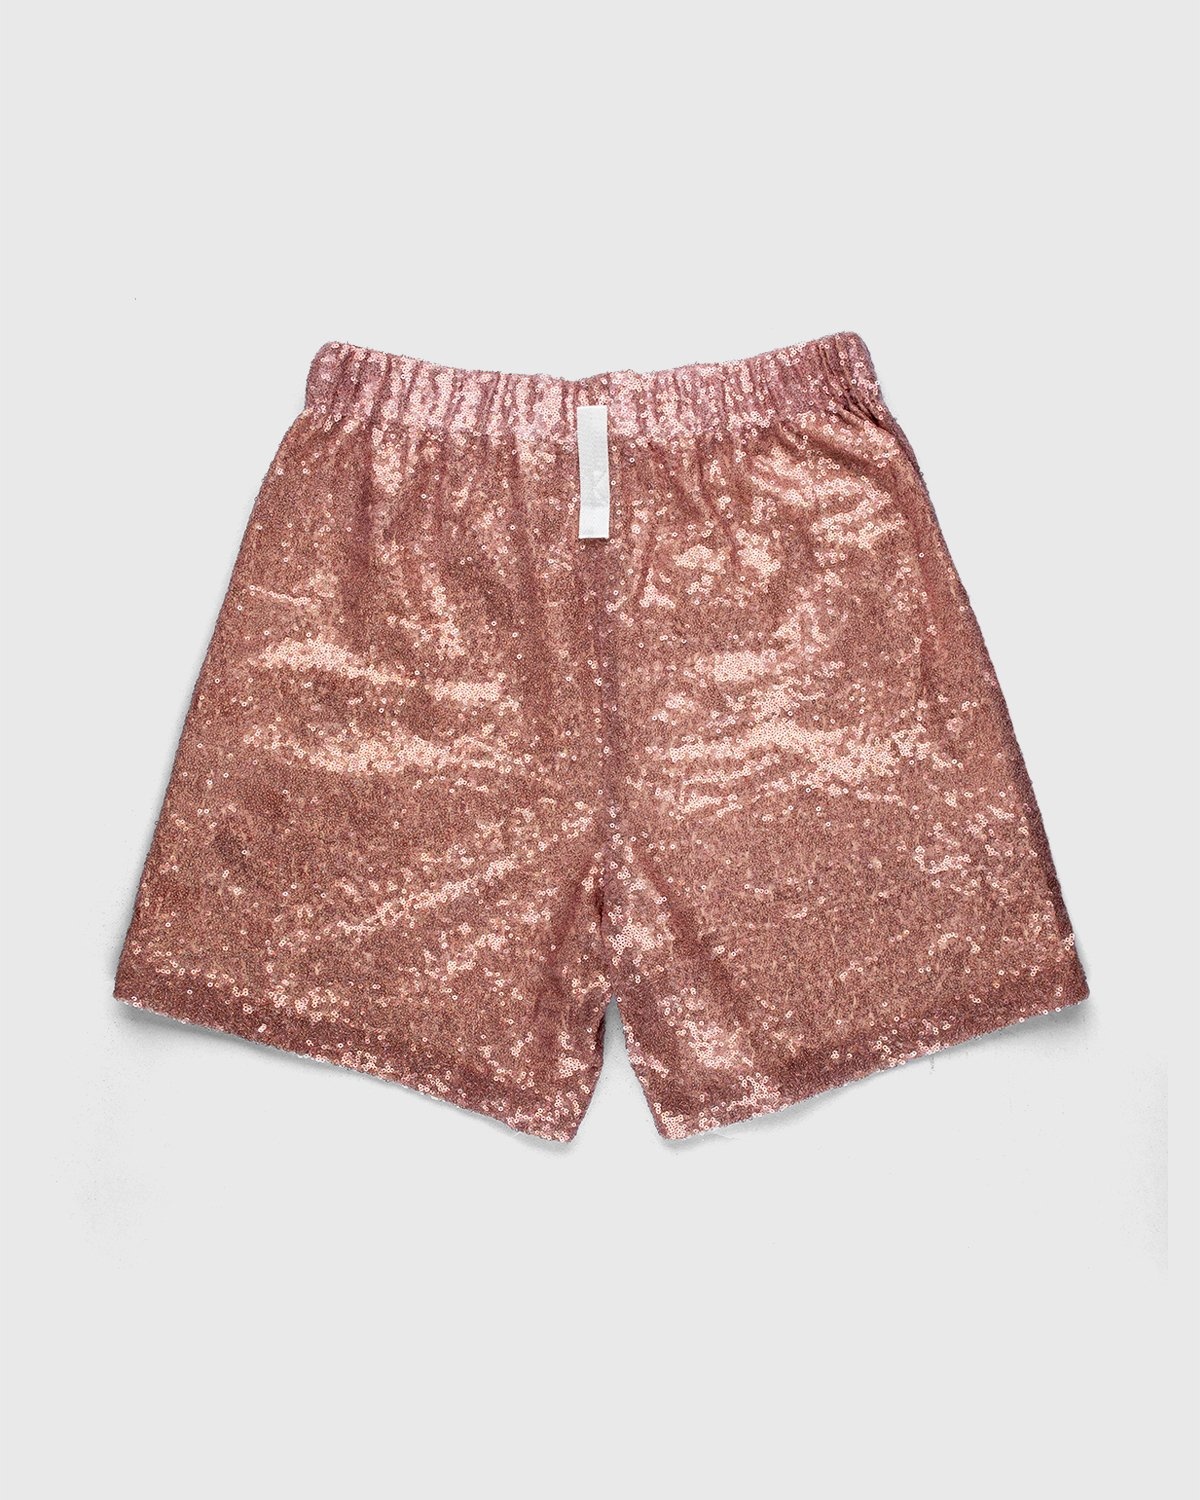 Advisory Board Crystals x Highsnobiety – Sequin Shorts Pink - Shorts - Pink - Image 2